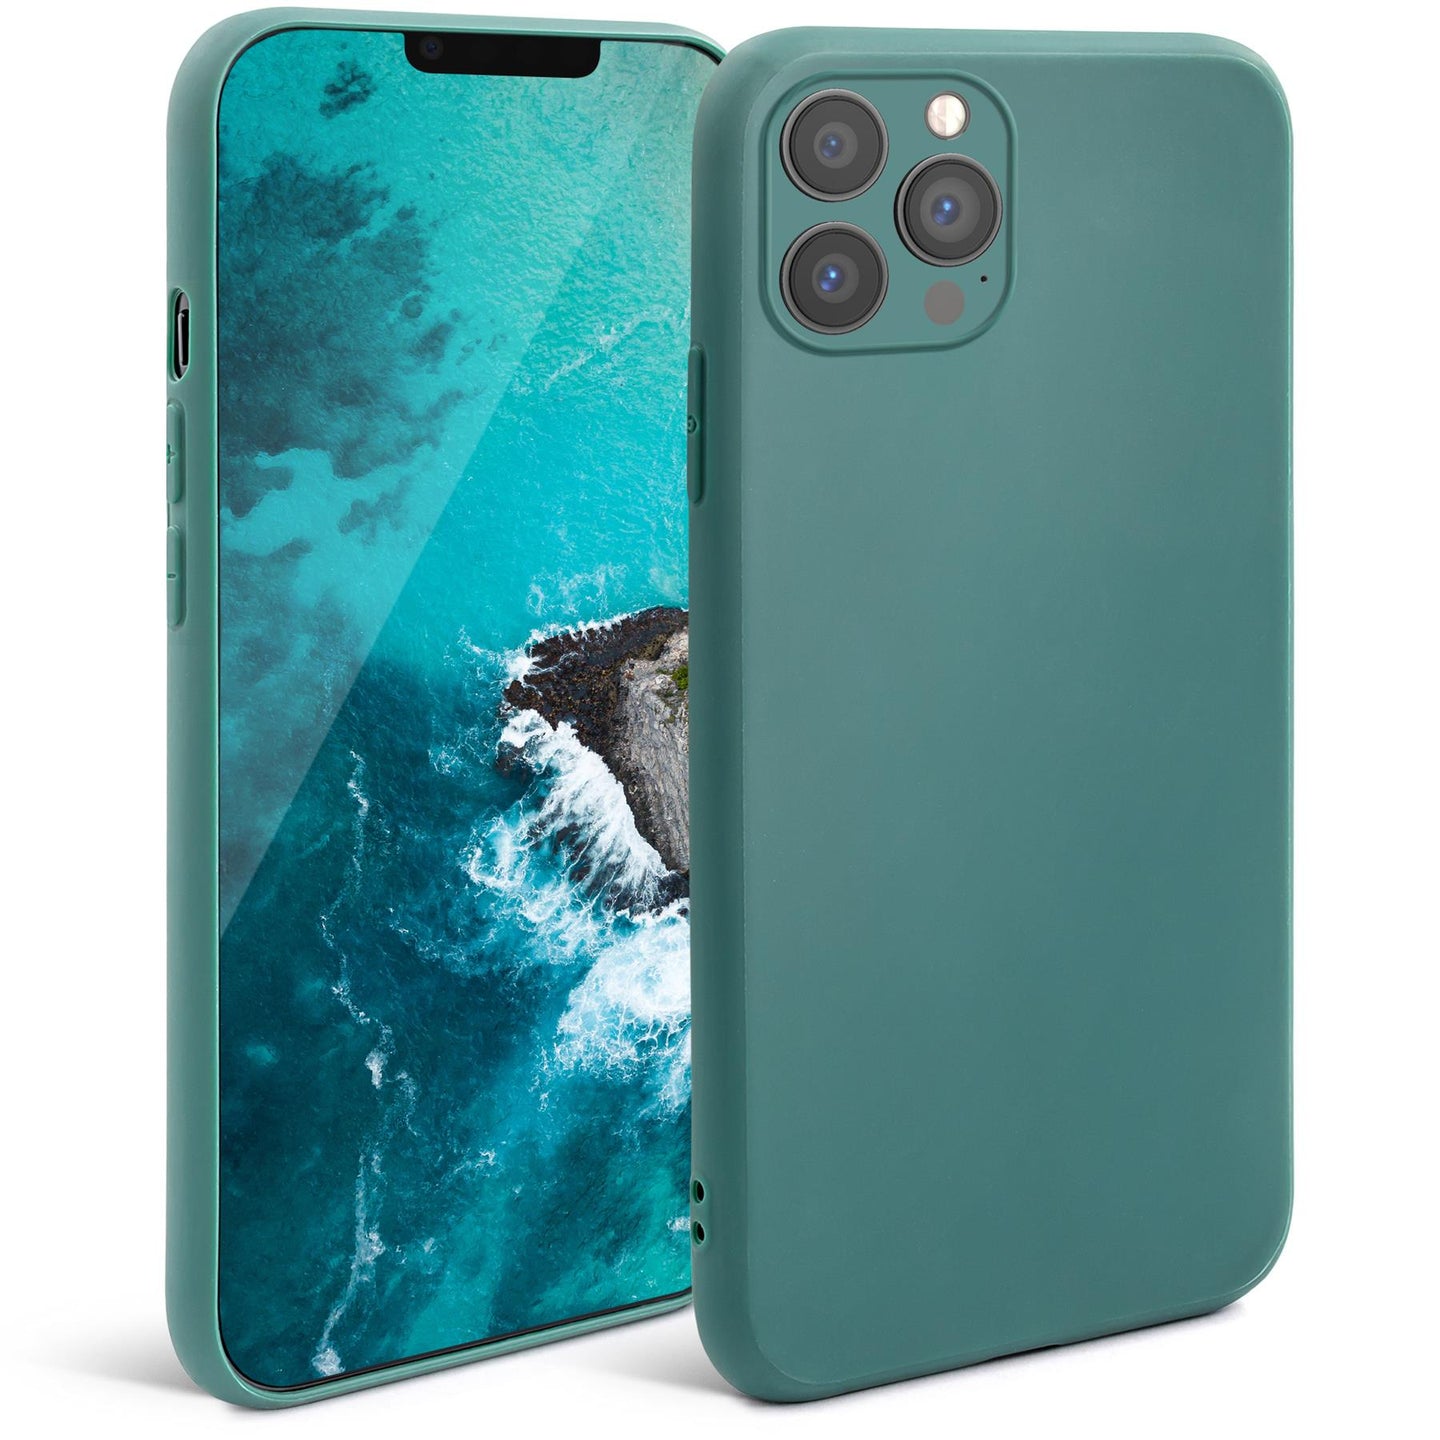 Moozy Minimalist Series Silicone Case for iPhone 13 Pro, Blue Grey - Matte Finish Lightweight Mobile Phone Case Slim Soft Protective